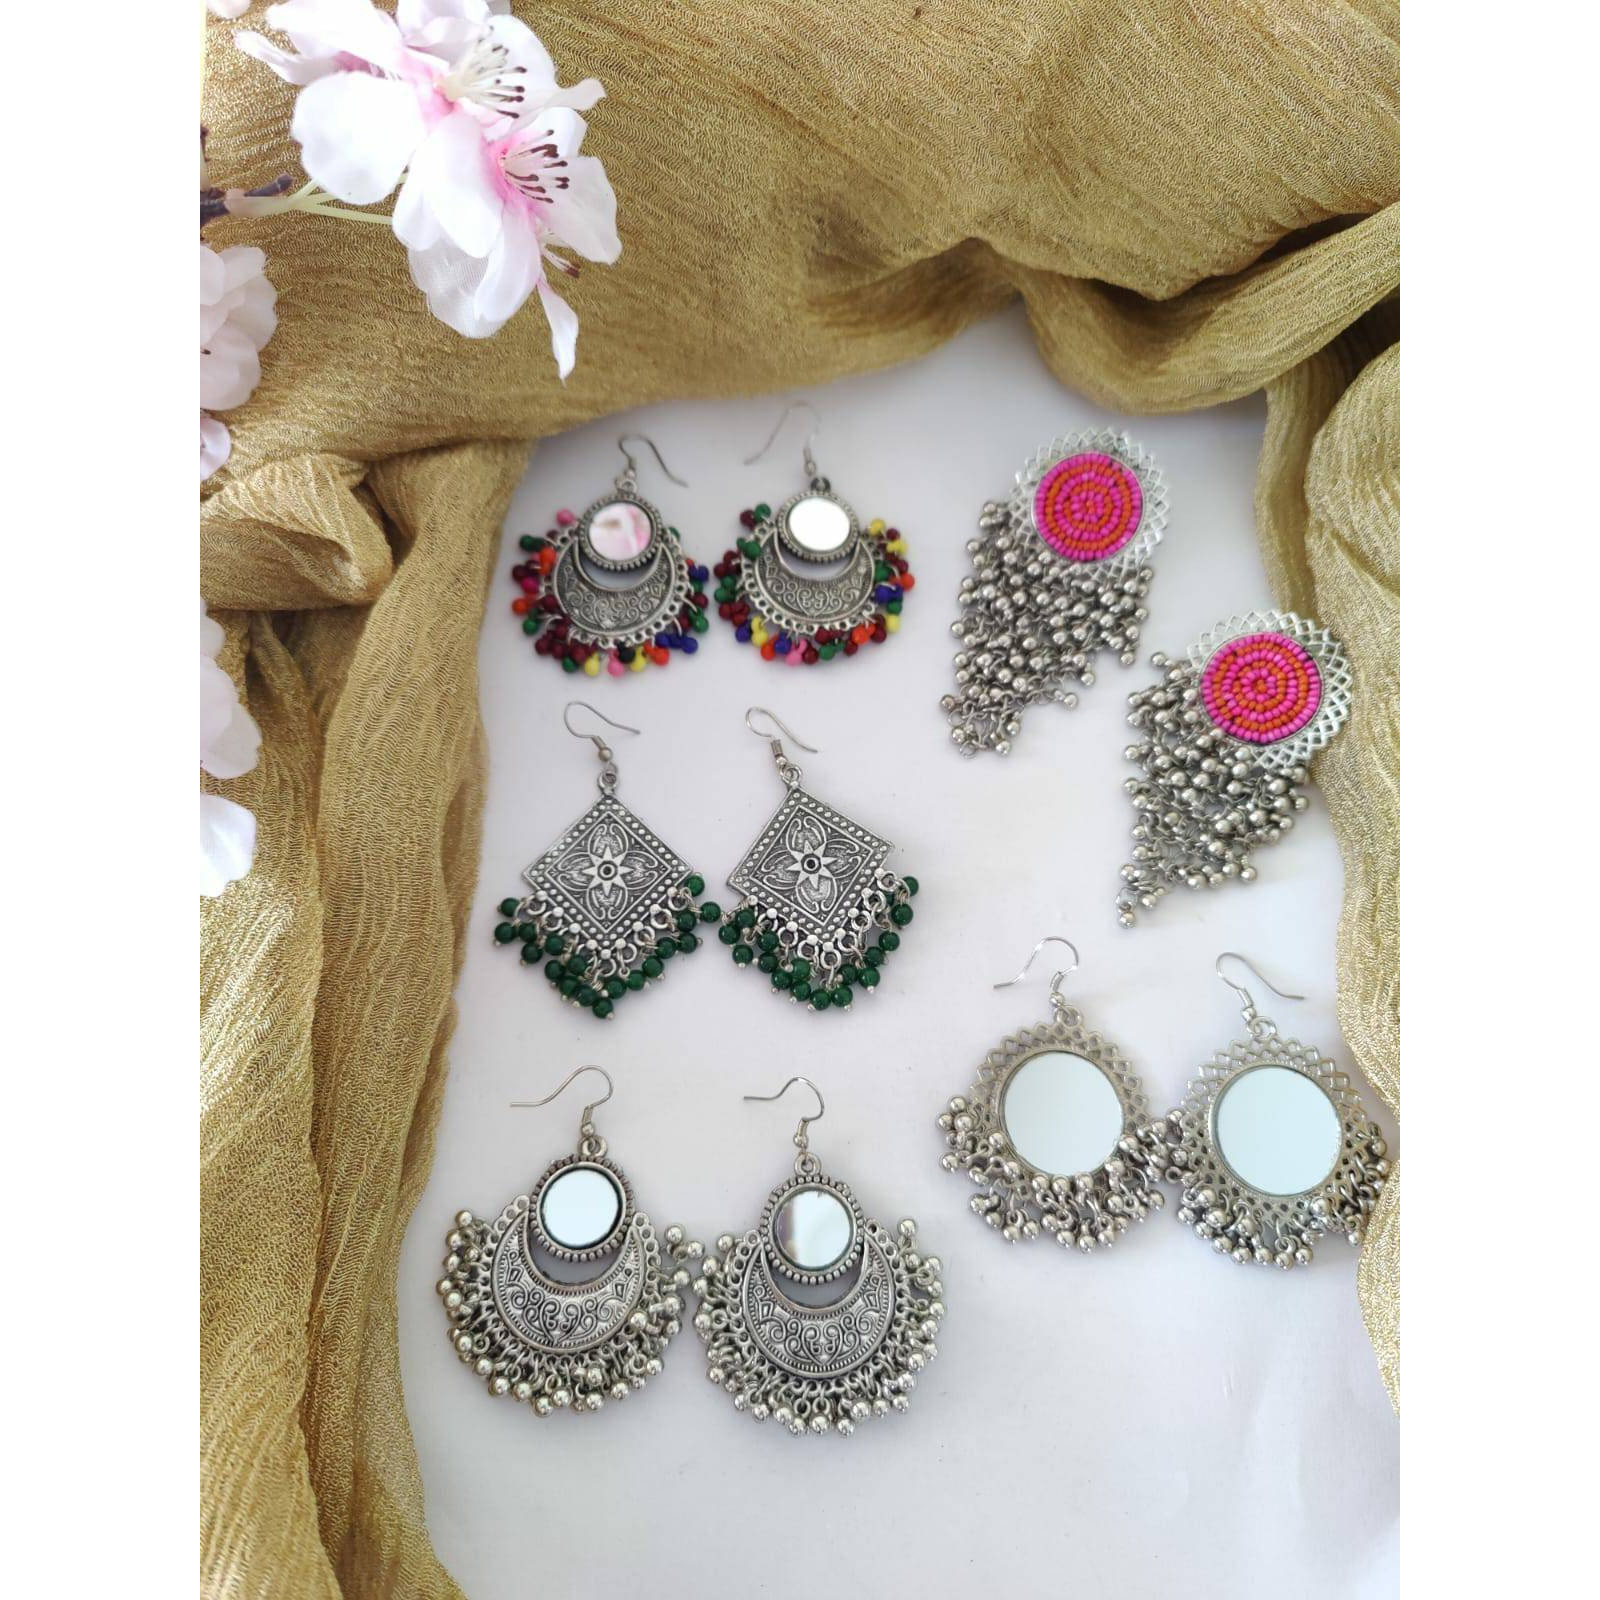 Celebrate your Navratri with this double necklace ful combo set.This beautiful set of 5 has a big long Haram oxidized necklace, pair of jhumka earrings, a ring,pair of bangles, and a nose pin.Grab this beautiful set with any of the ethnic/ Indo western outfit and look unique in the crowd.Premium quality!!